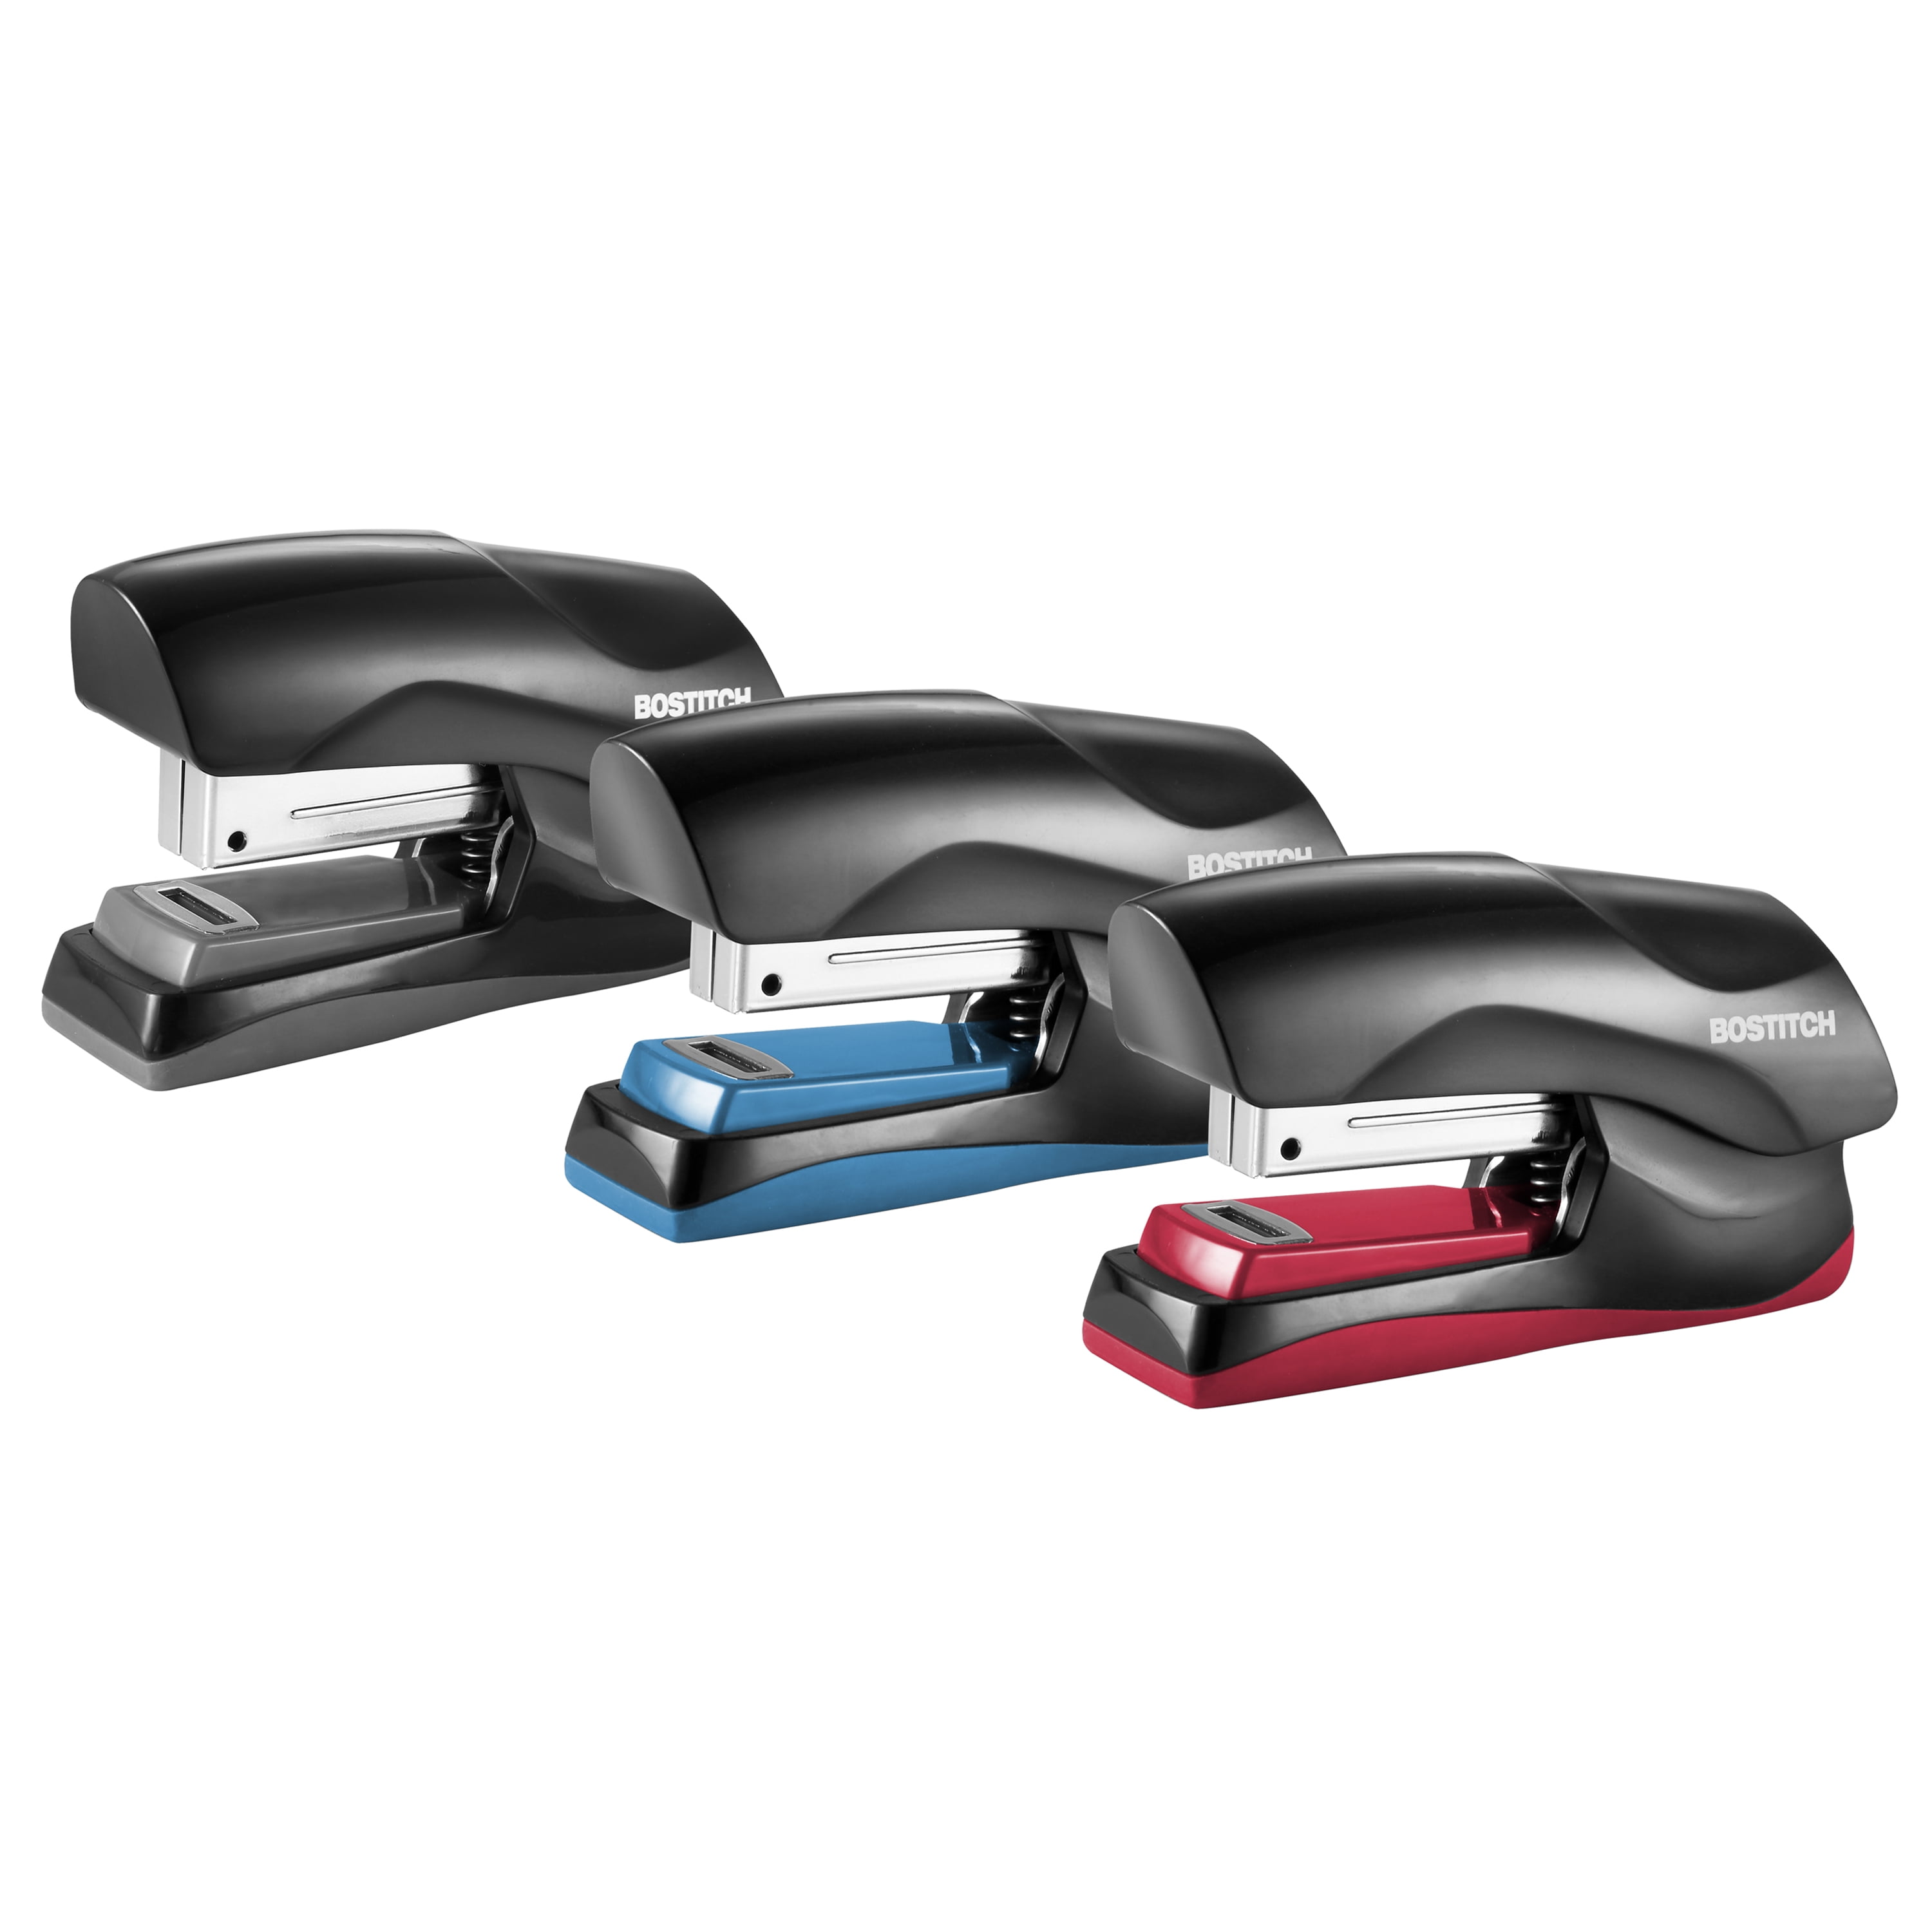 Fits into The Palm of Your Hand; Black - New Bostitch Office Heavy Duty 40 Sheet Stapler Small Stapler Size B175-BLK